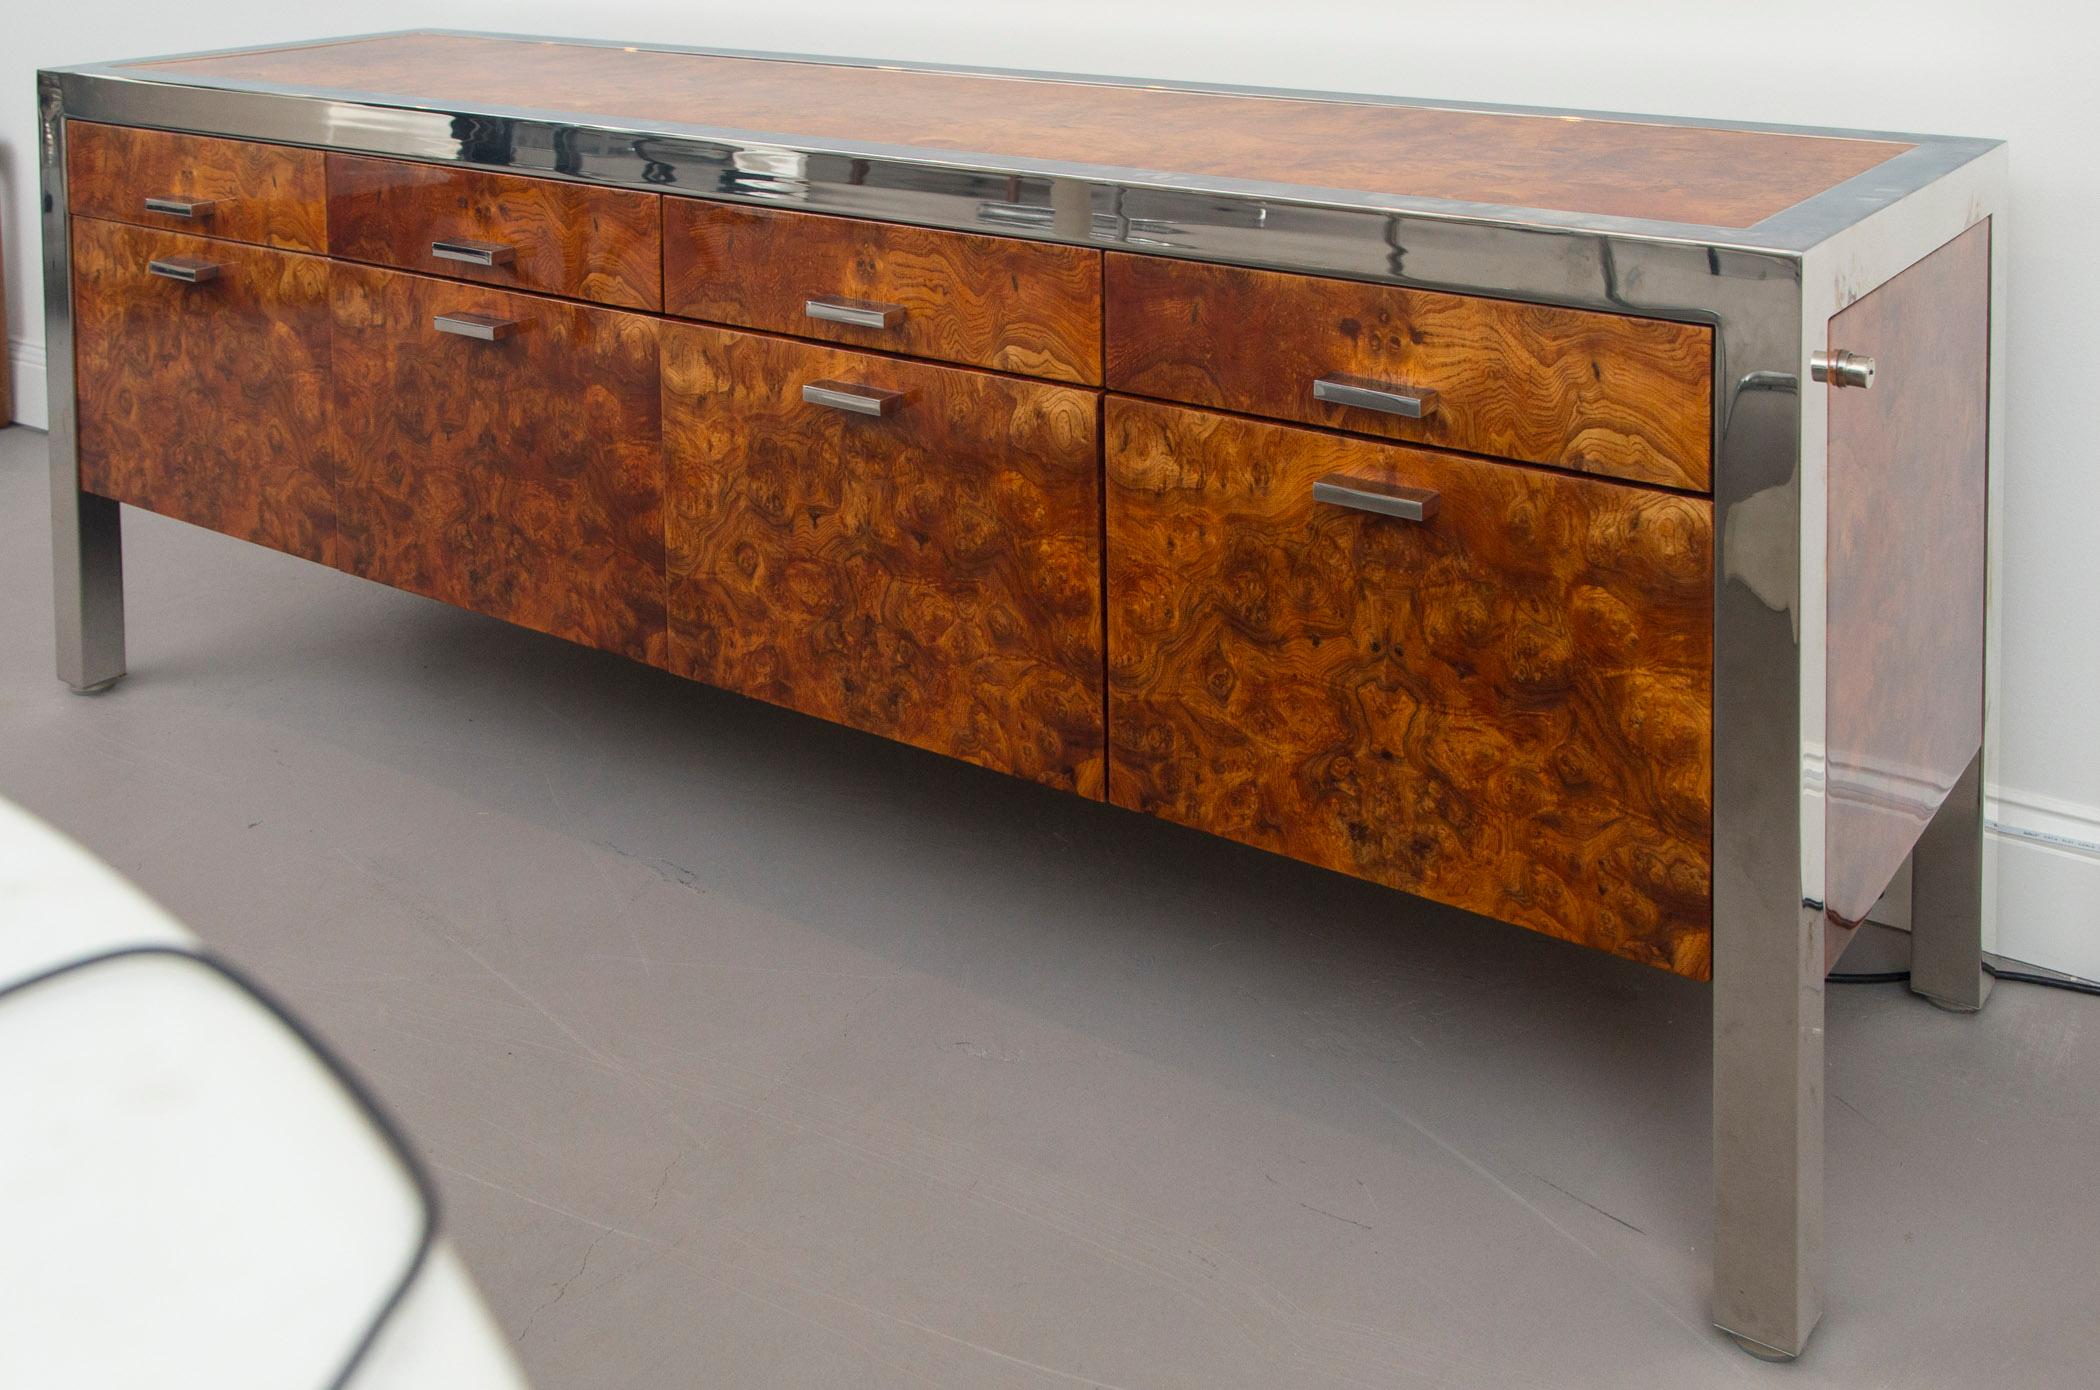 Pace Collection burled wood and chrome credenza.